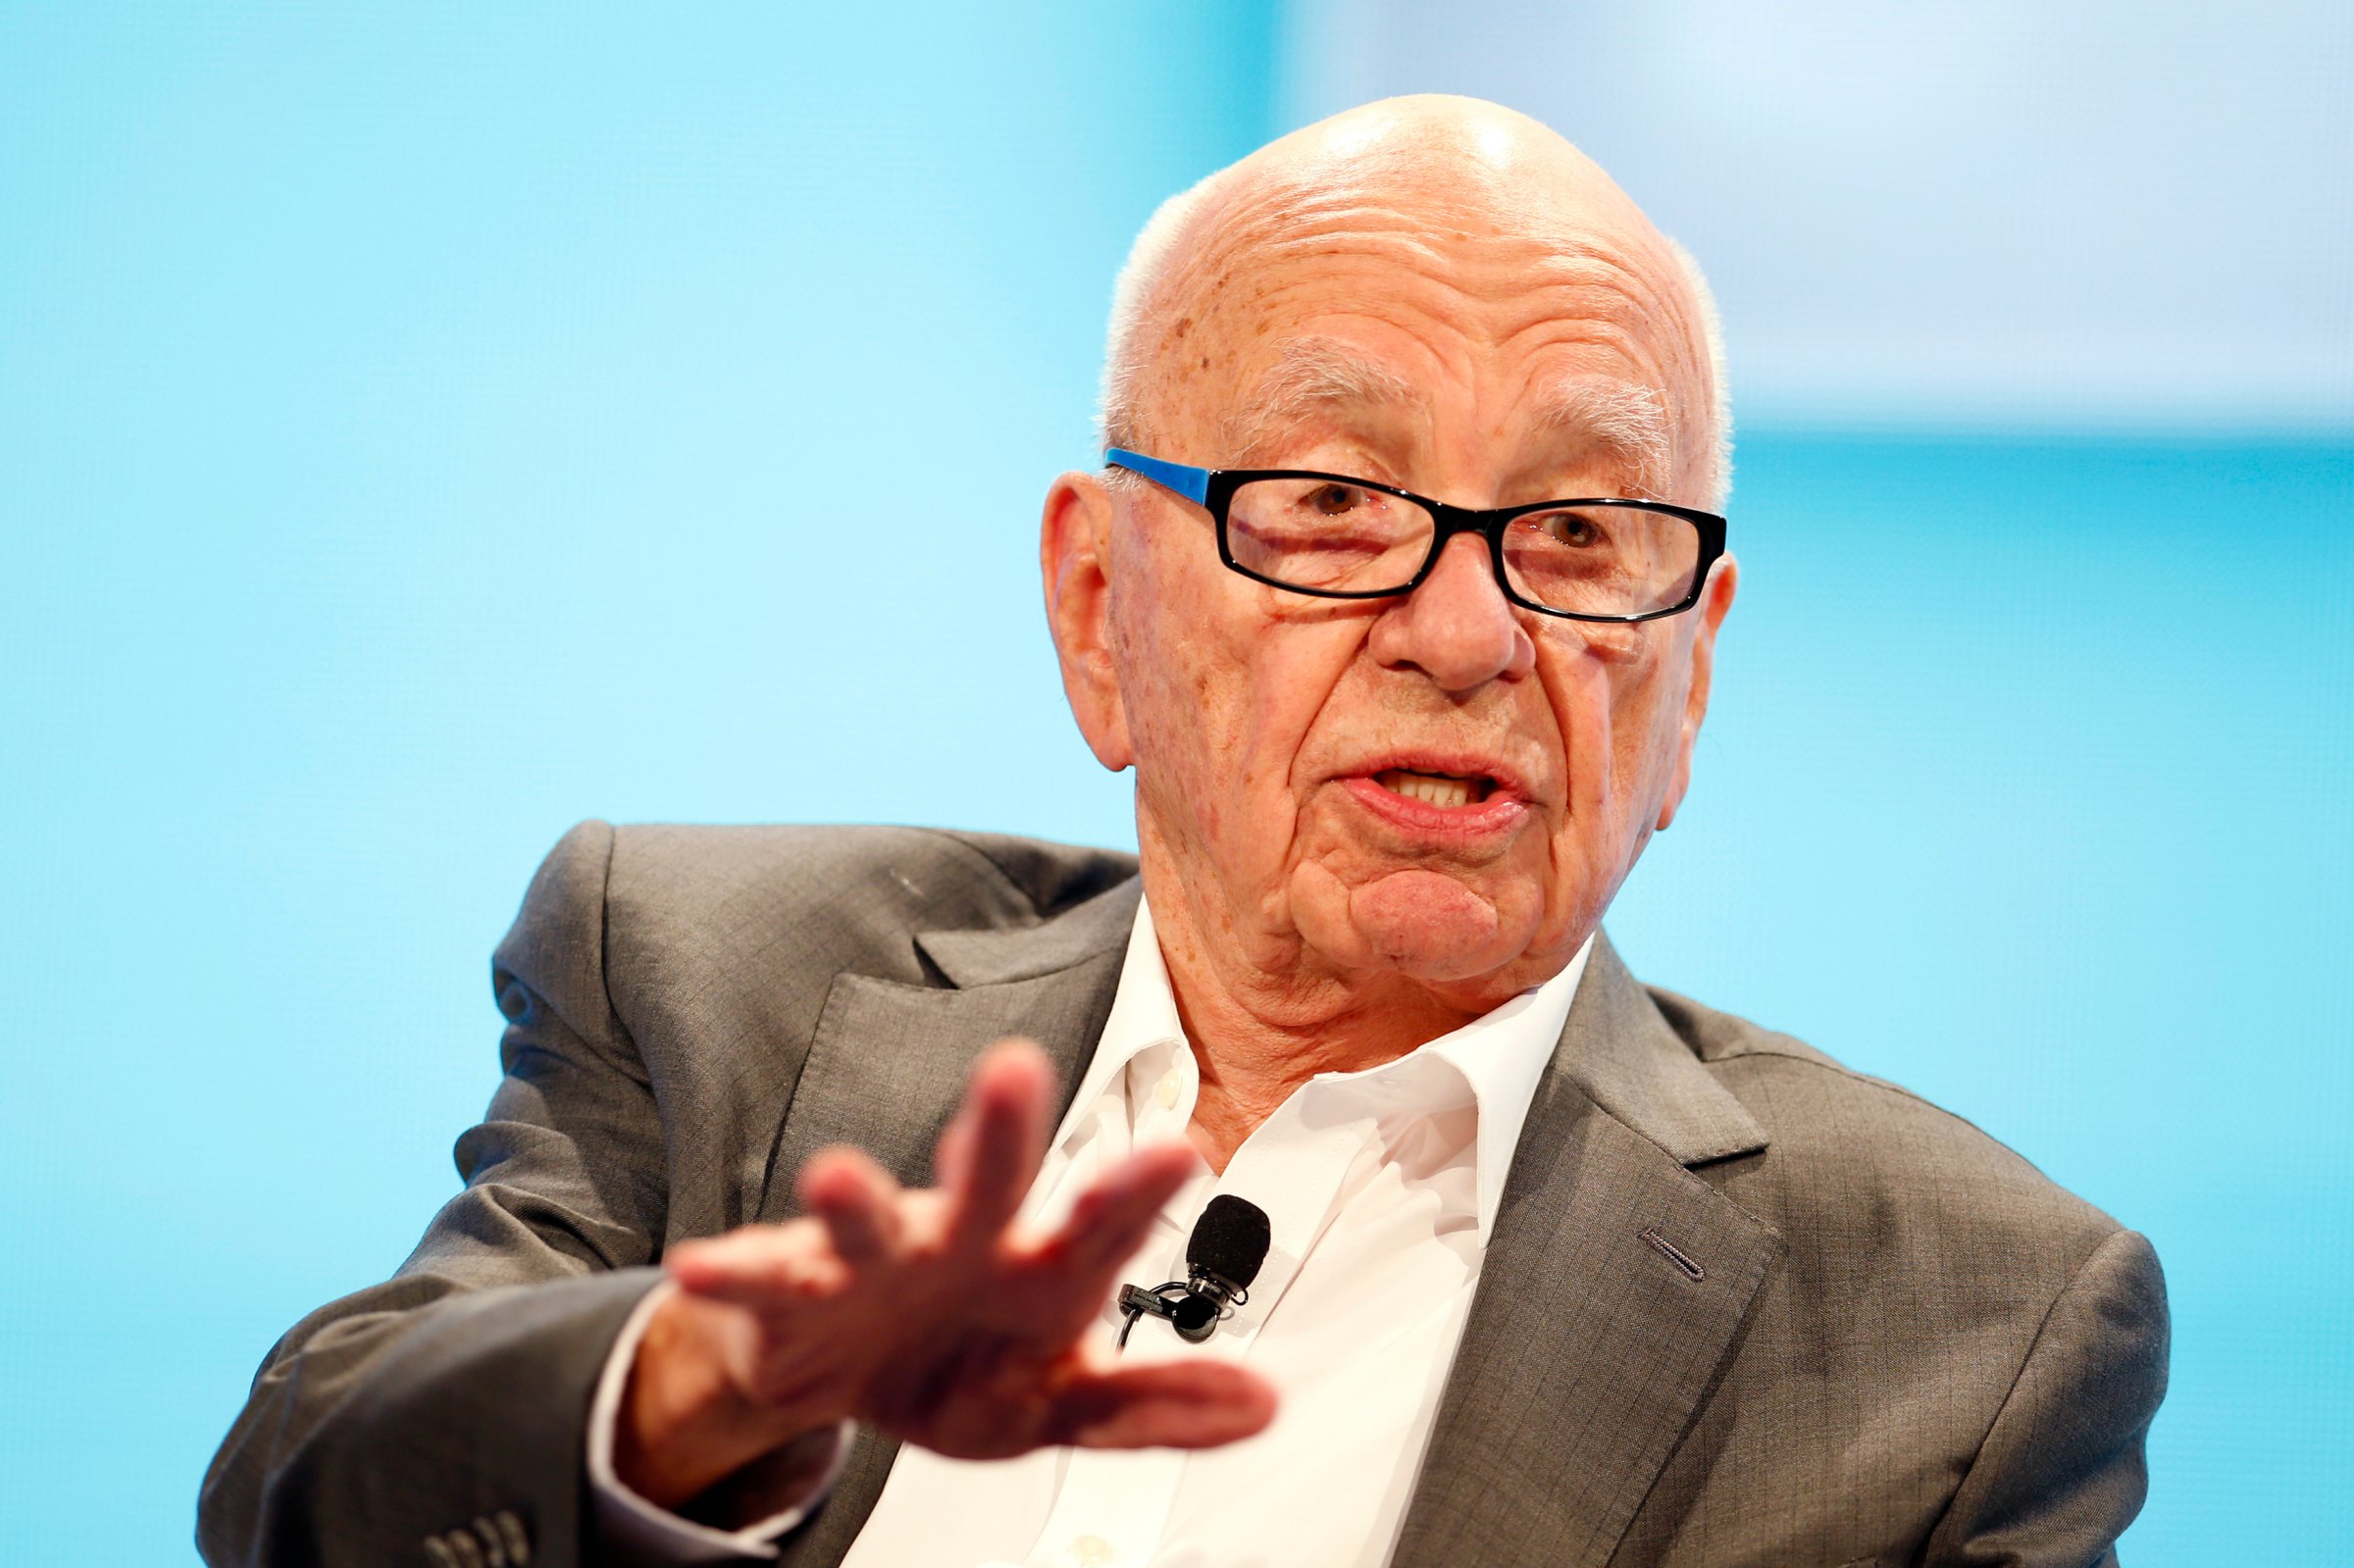 Rupert Murdoch, Executive Chairman News Corp and Chairman and CEO 21st Century Fox speaks at the WSJD Live conference in Laguna Beach